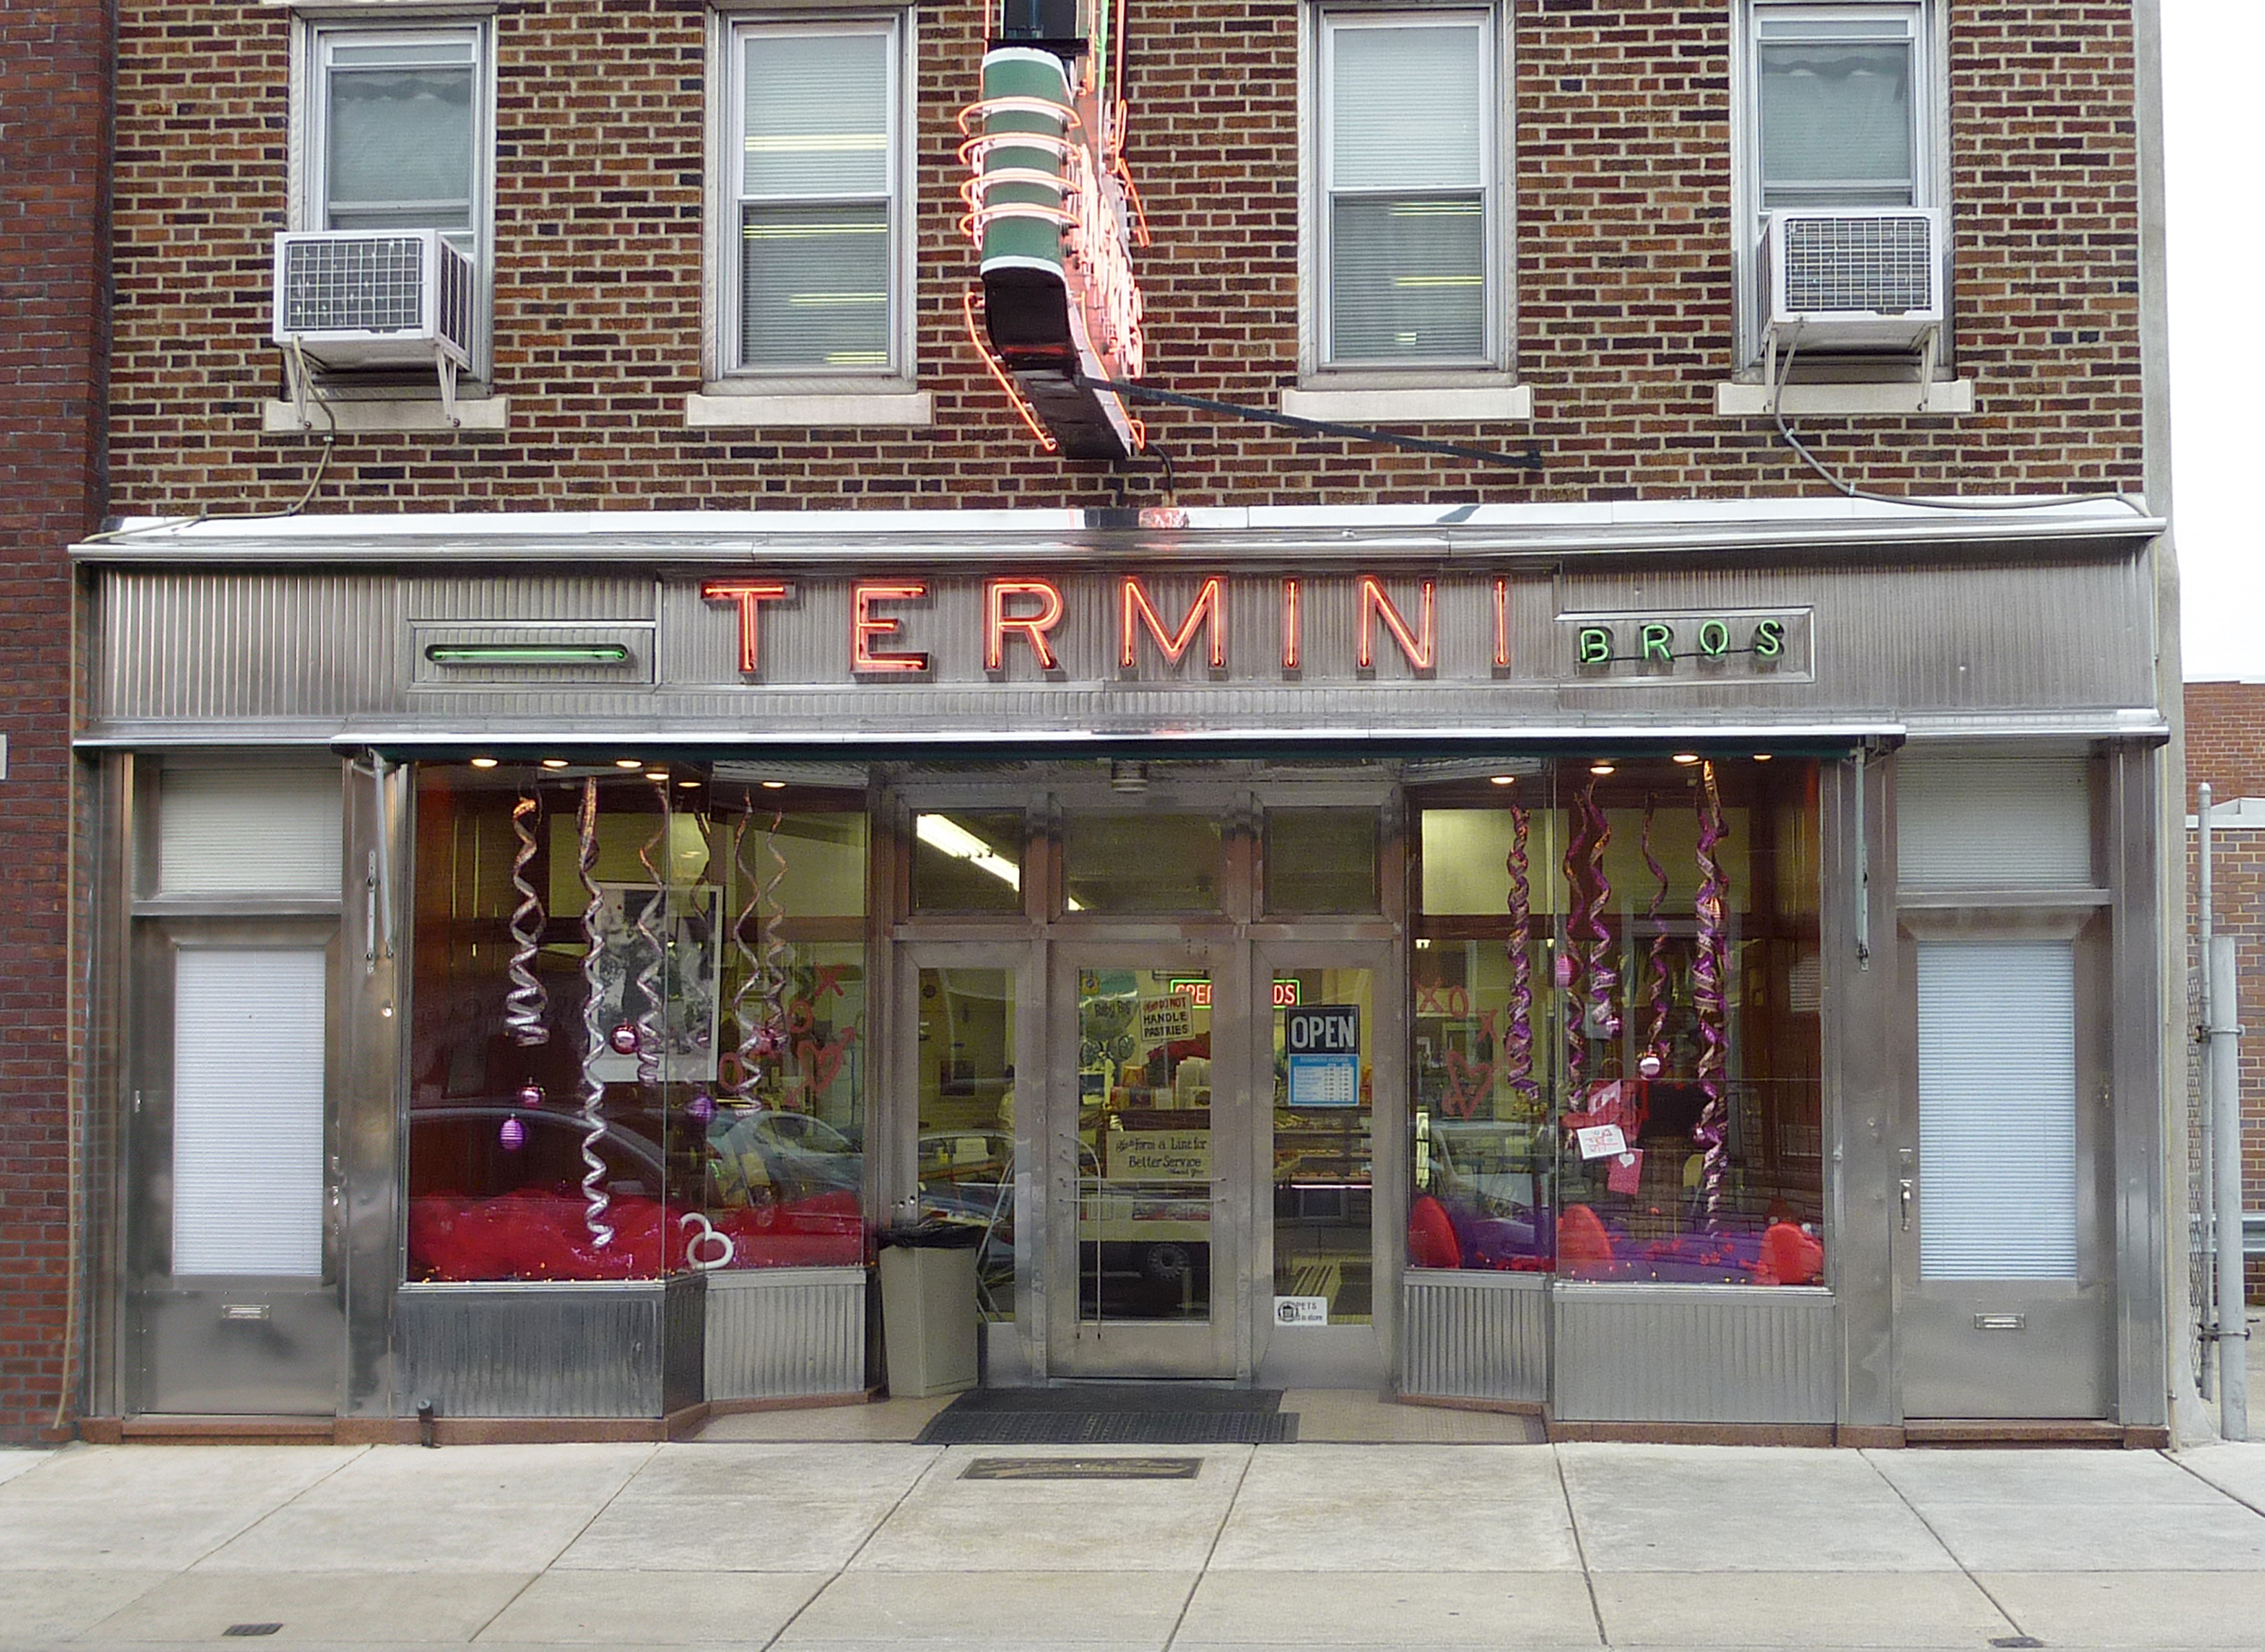 Termini Brothers Bakery, 1523 S. 8th St.